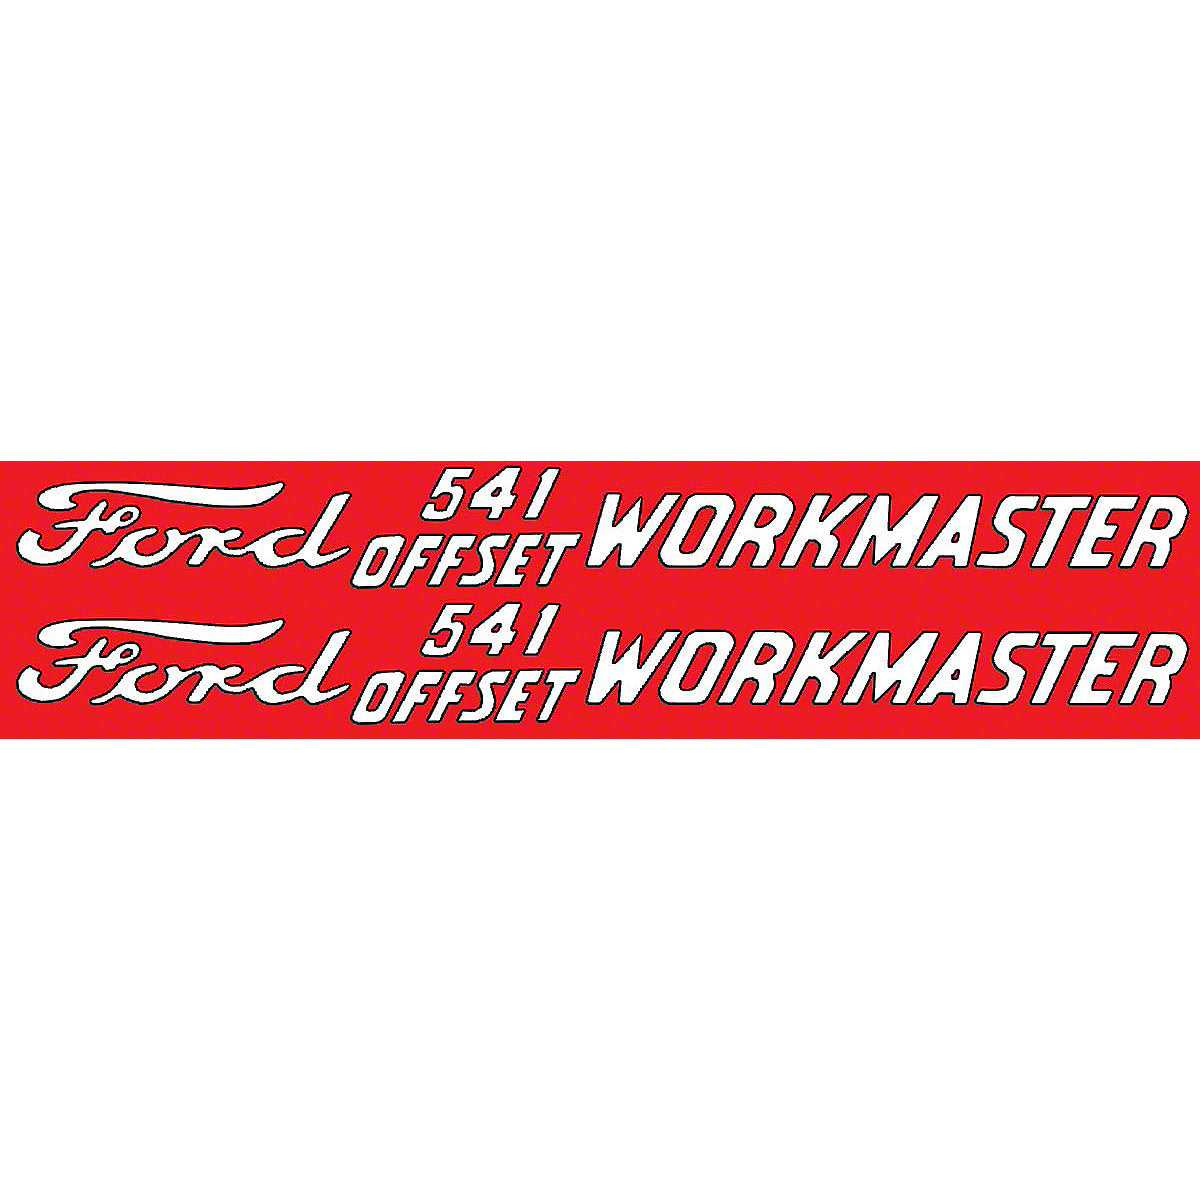 Set Of 2 Mylar Decals Fits Ford Tractor 541 Offset Workmaster